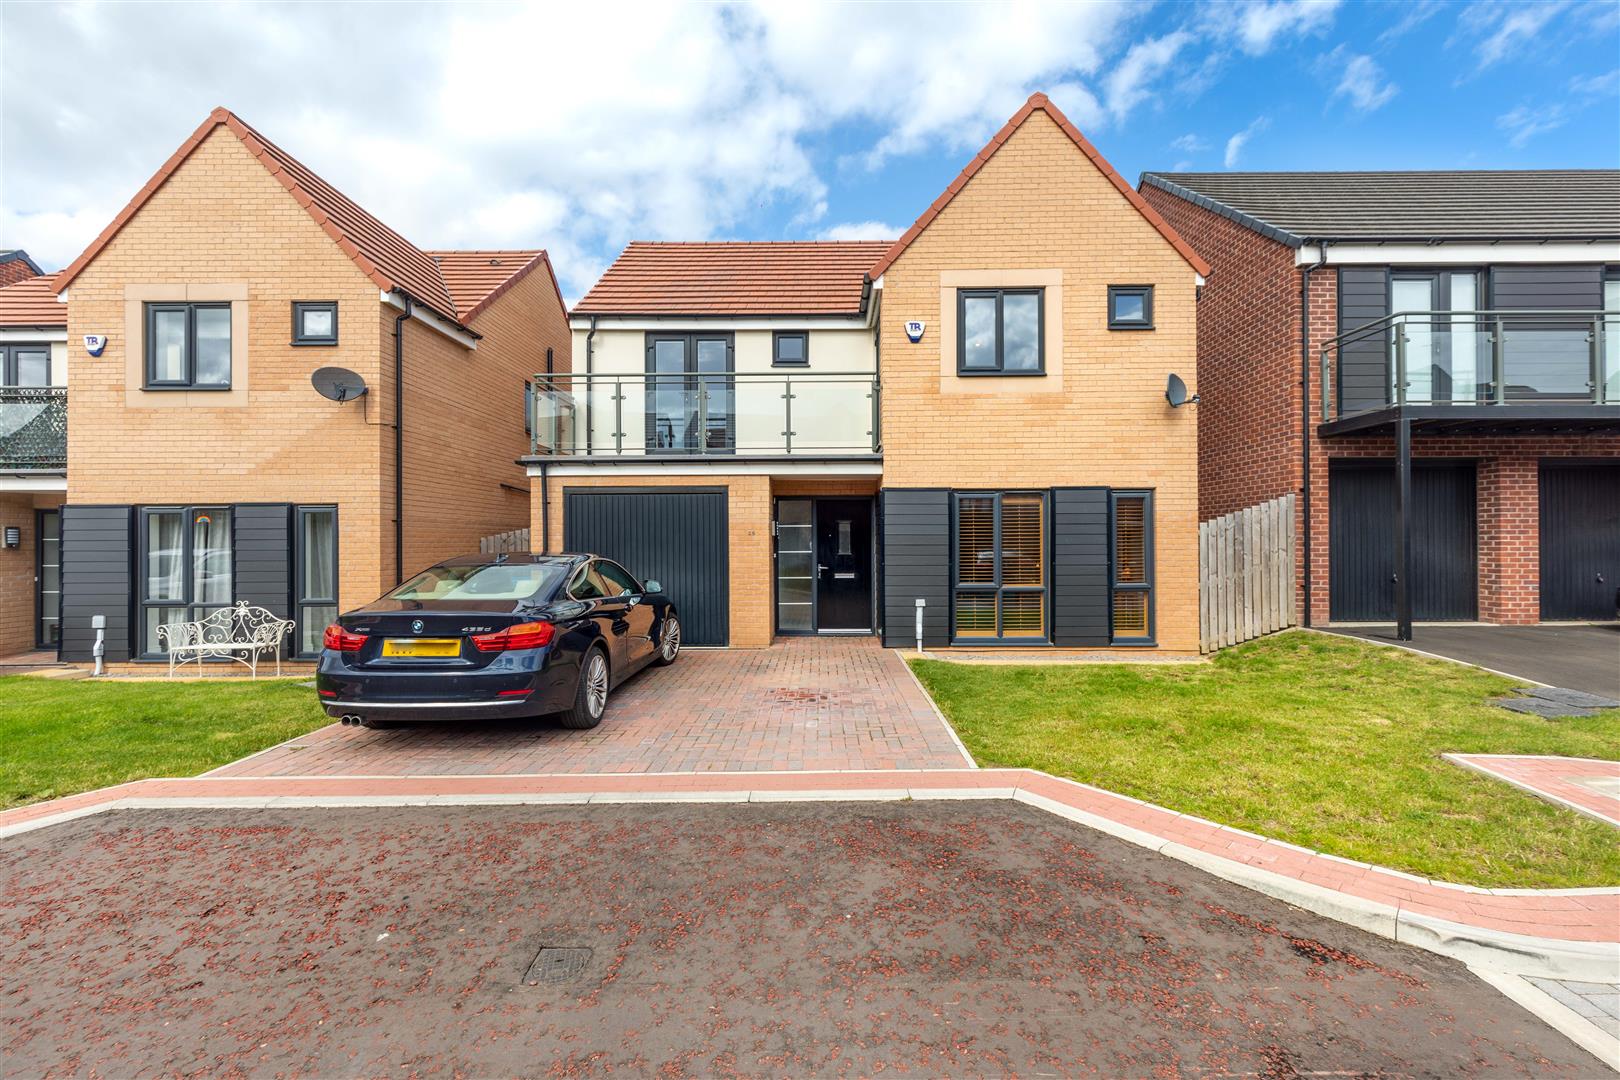 4 bed detached house for sale in Birchwood Chase, Great Park  - Property Image 1